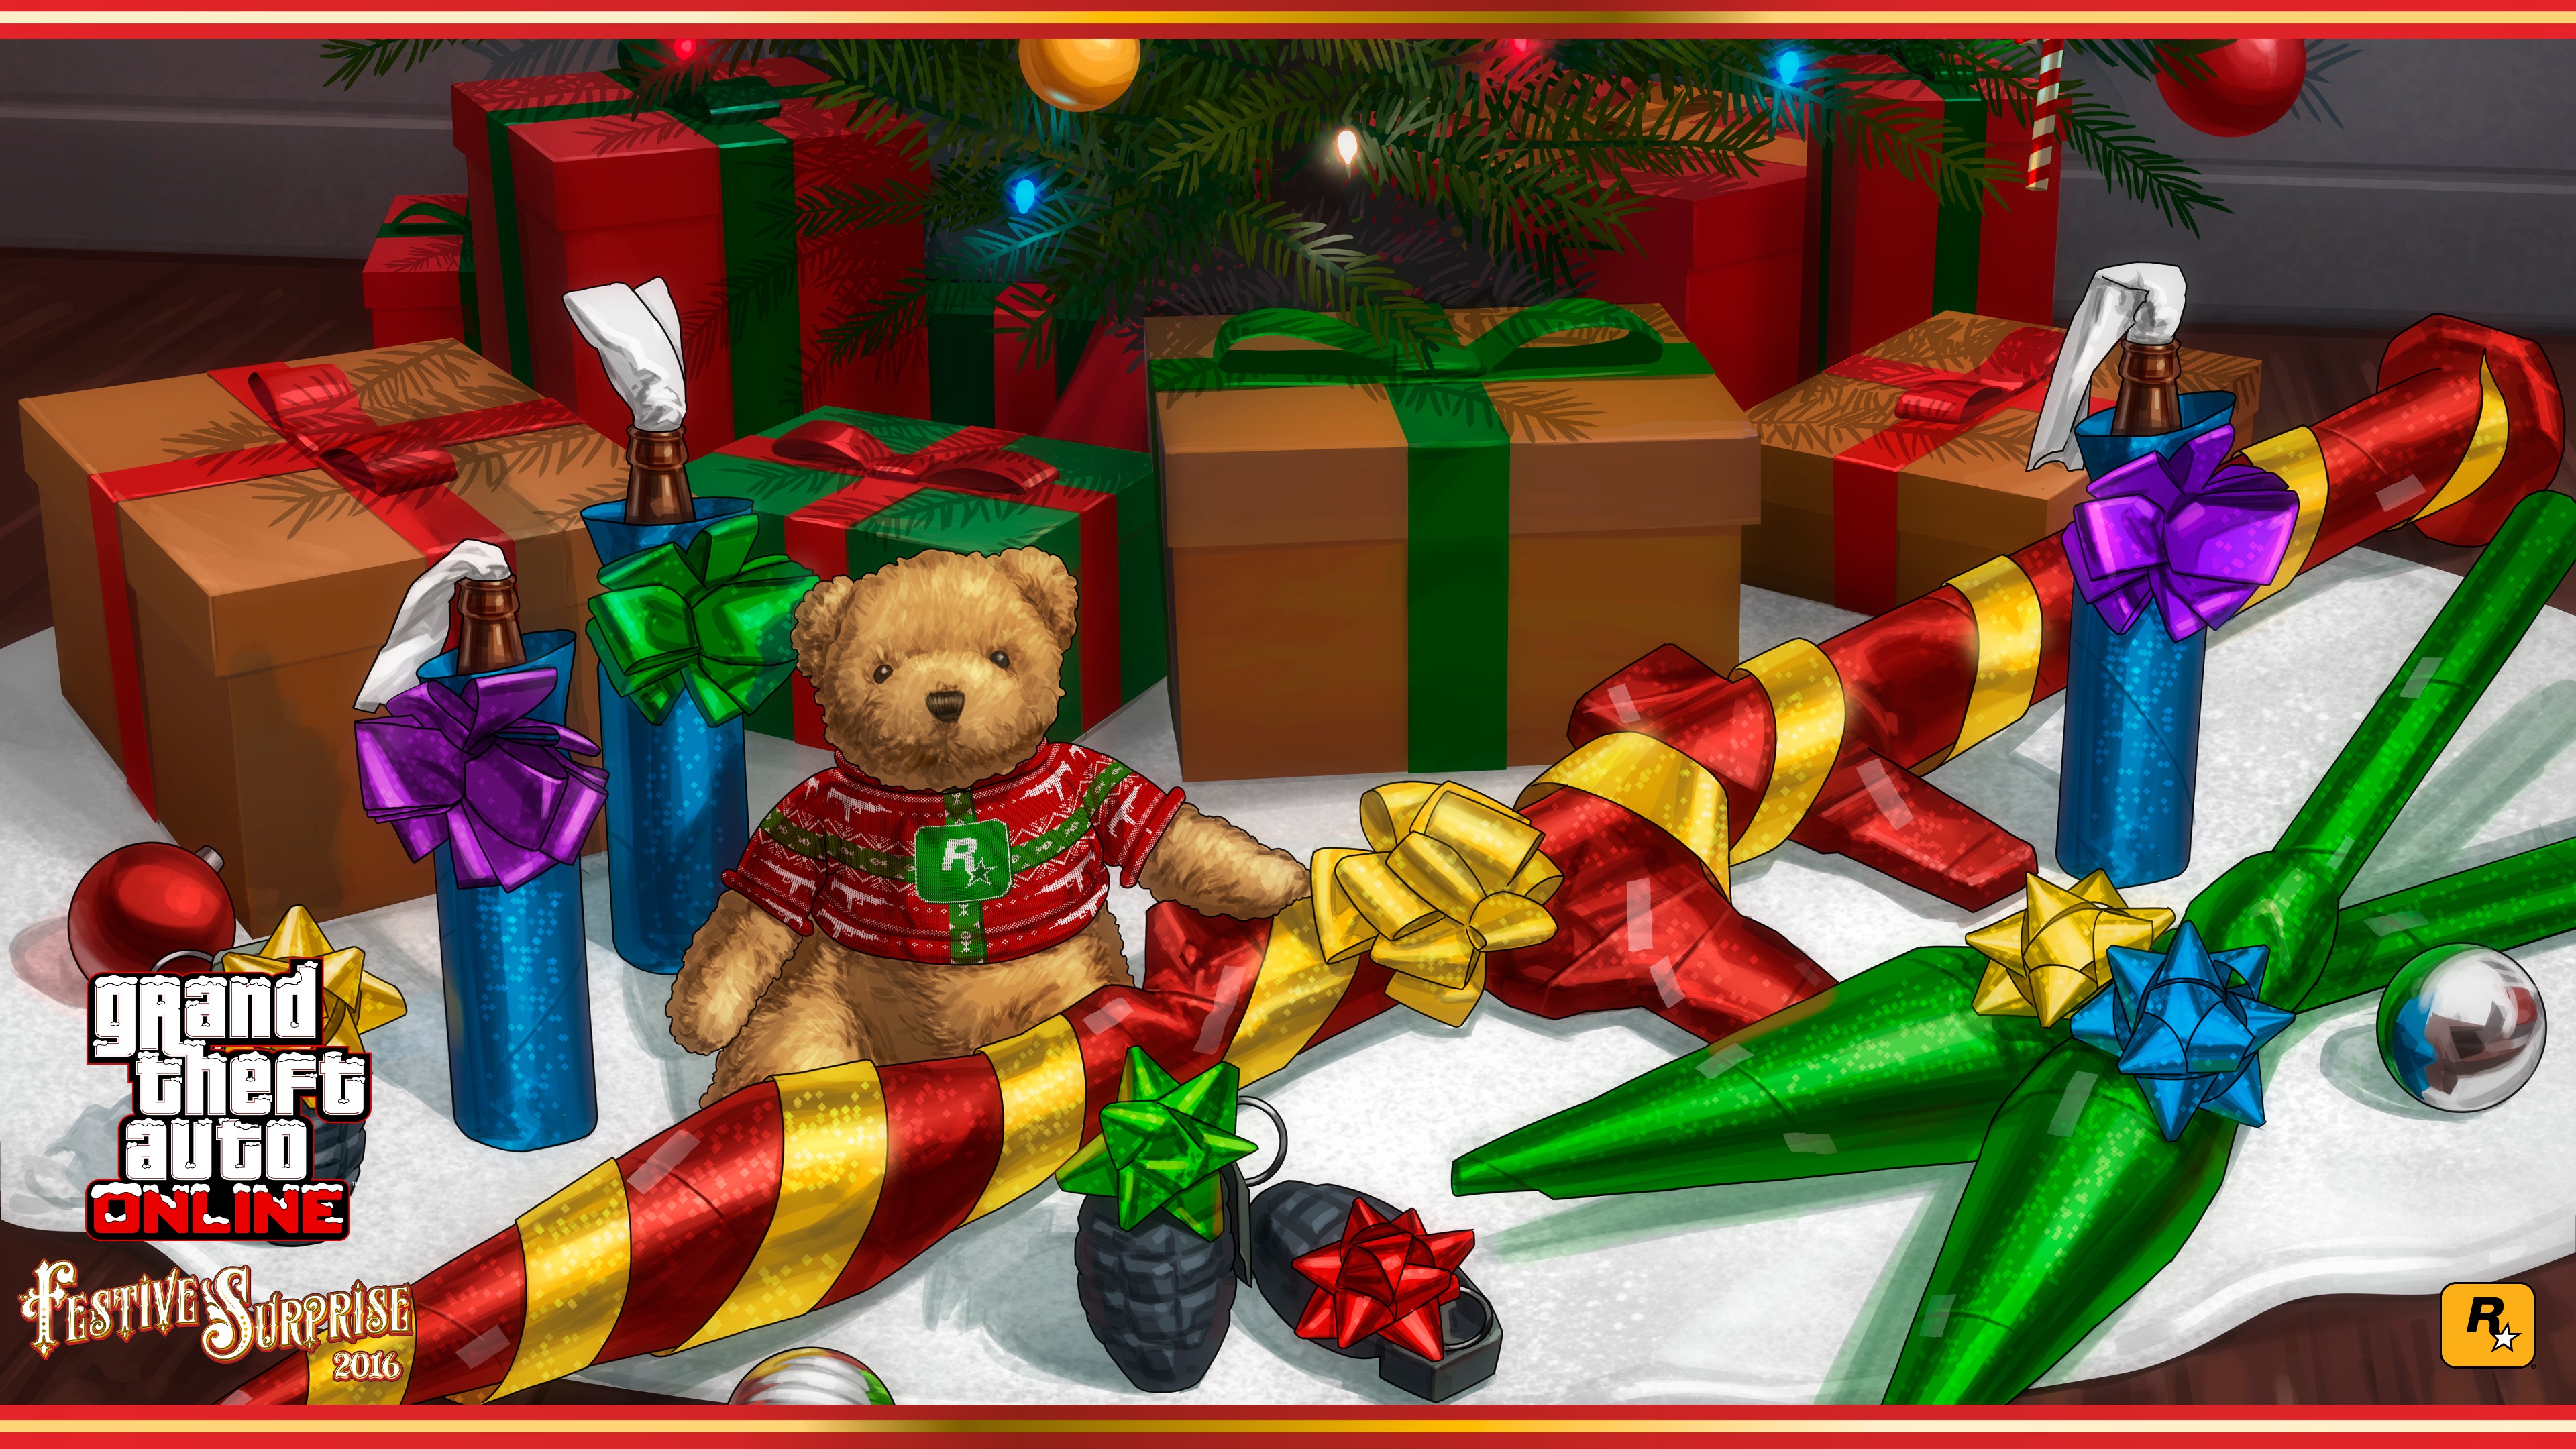 General 3840x2160 Grand Theft Auto V Grand Theft Auto Online Rockstar Games holiday Christmas ornaments  teddy bears weapon video games